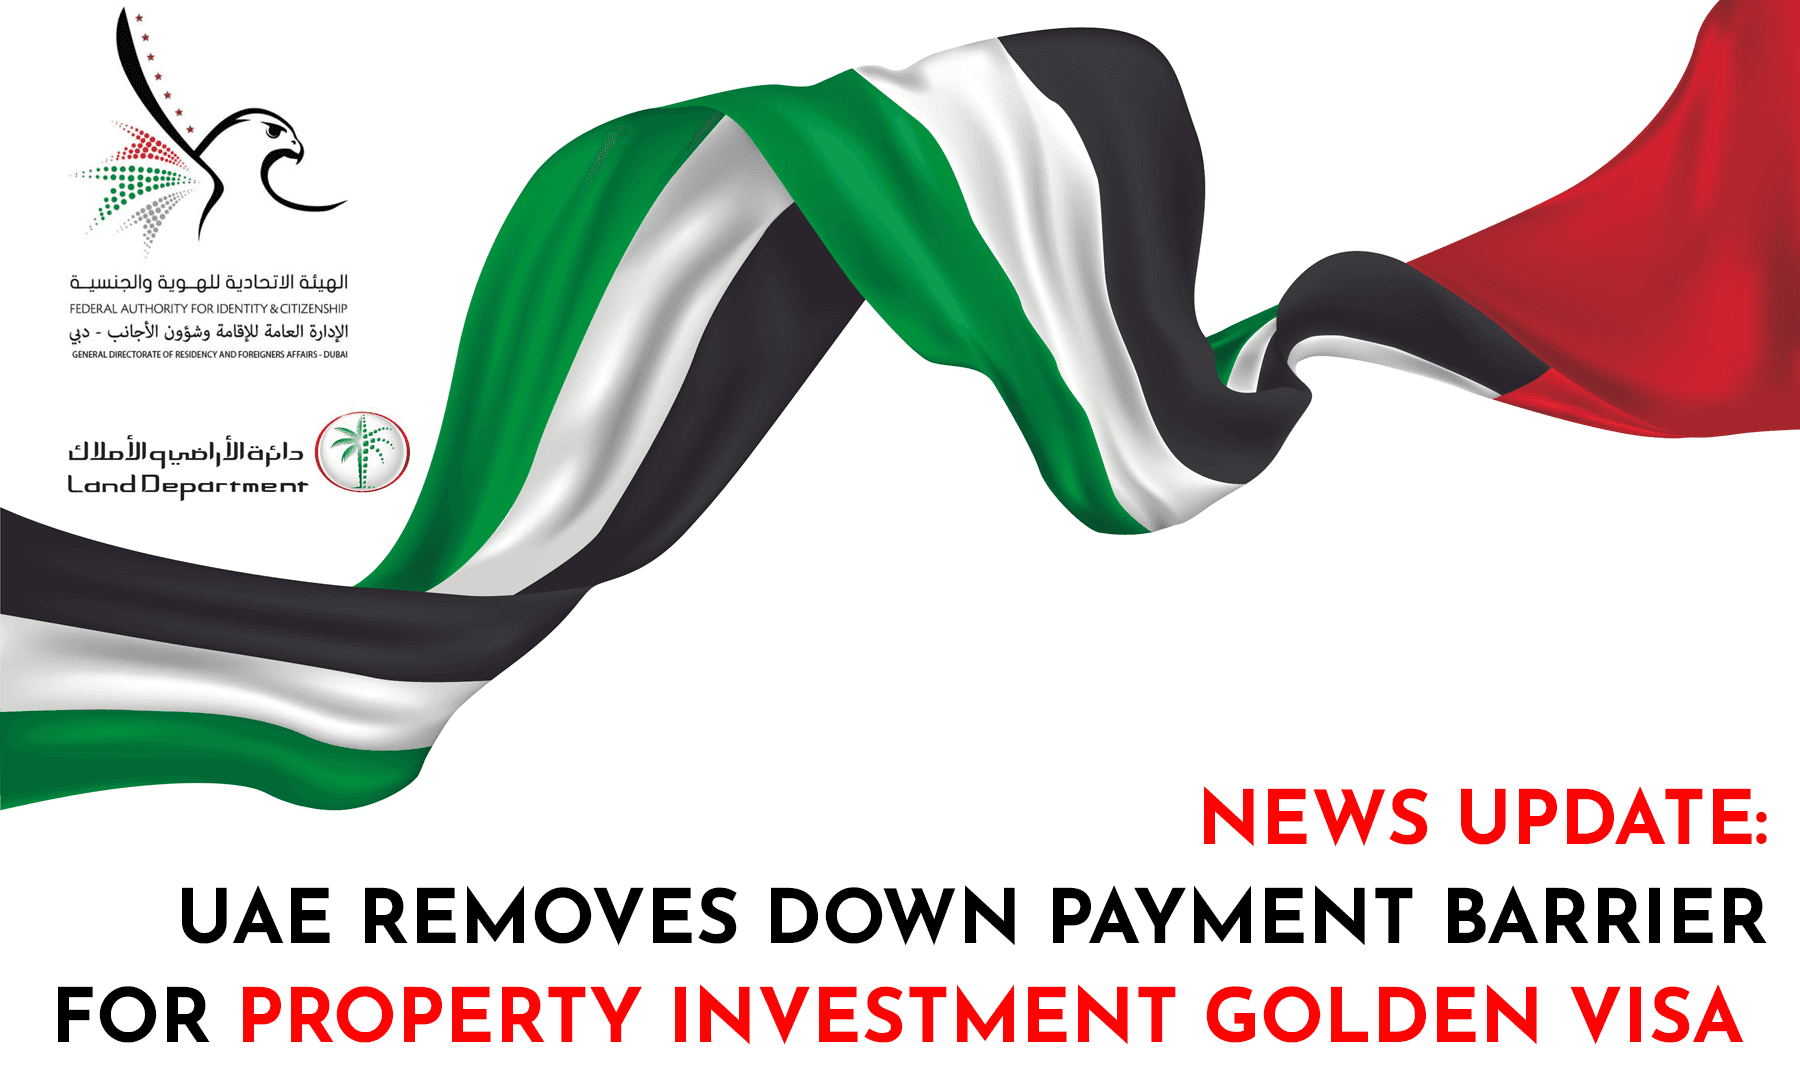 UAE REMOVES DOWN PAYMENT BARRIER FOR PROPERTY INVESTMENT GOLDEN VISA